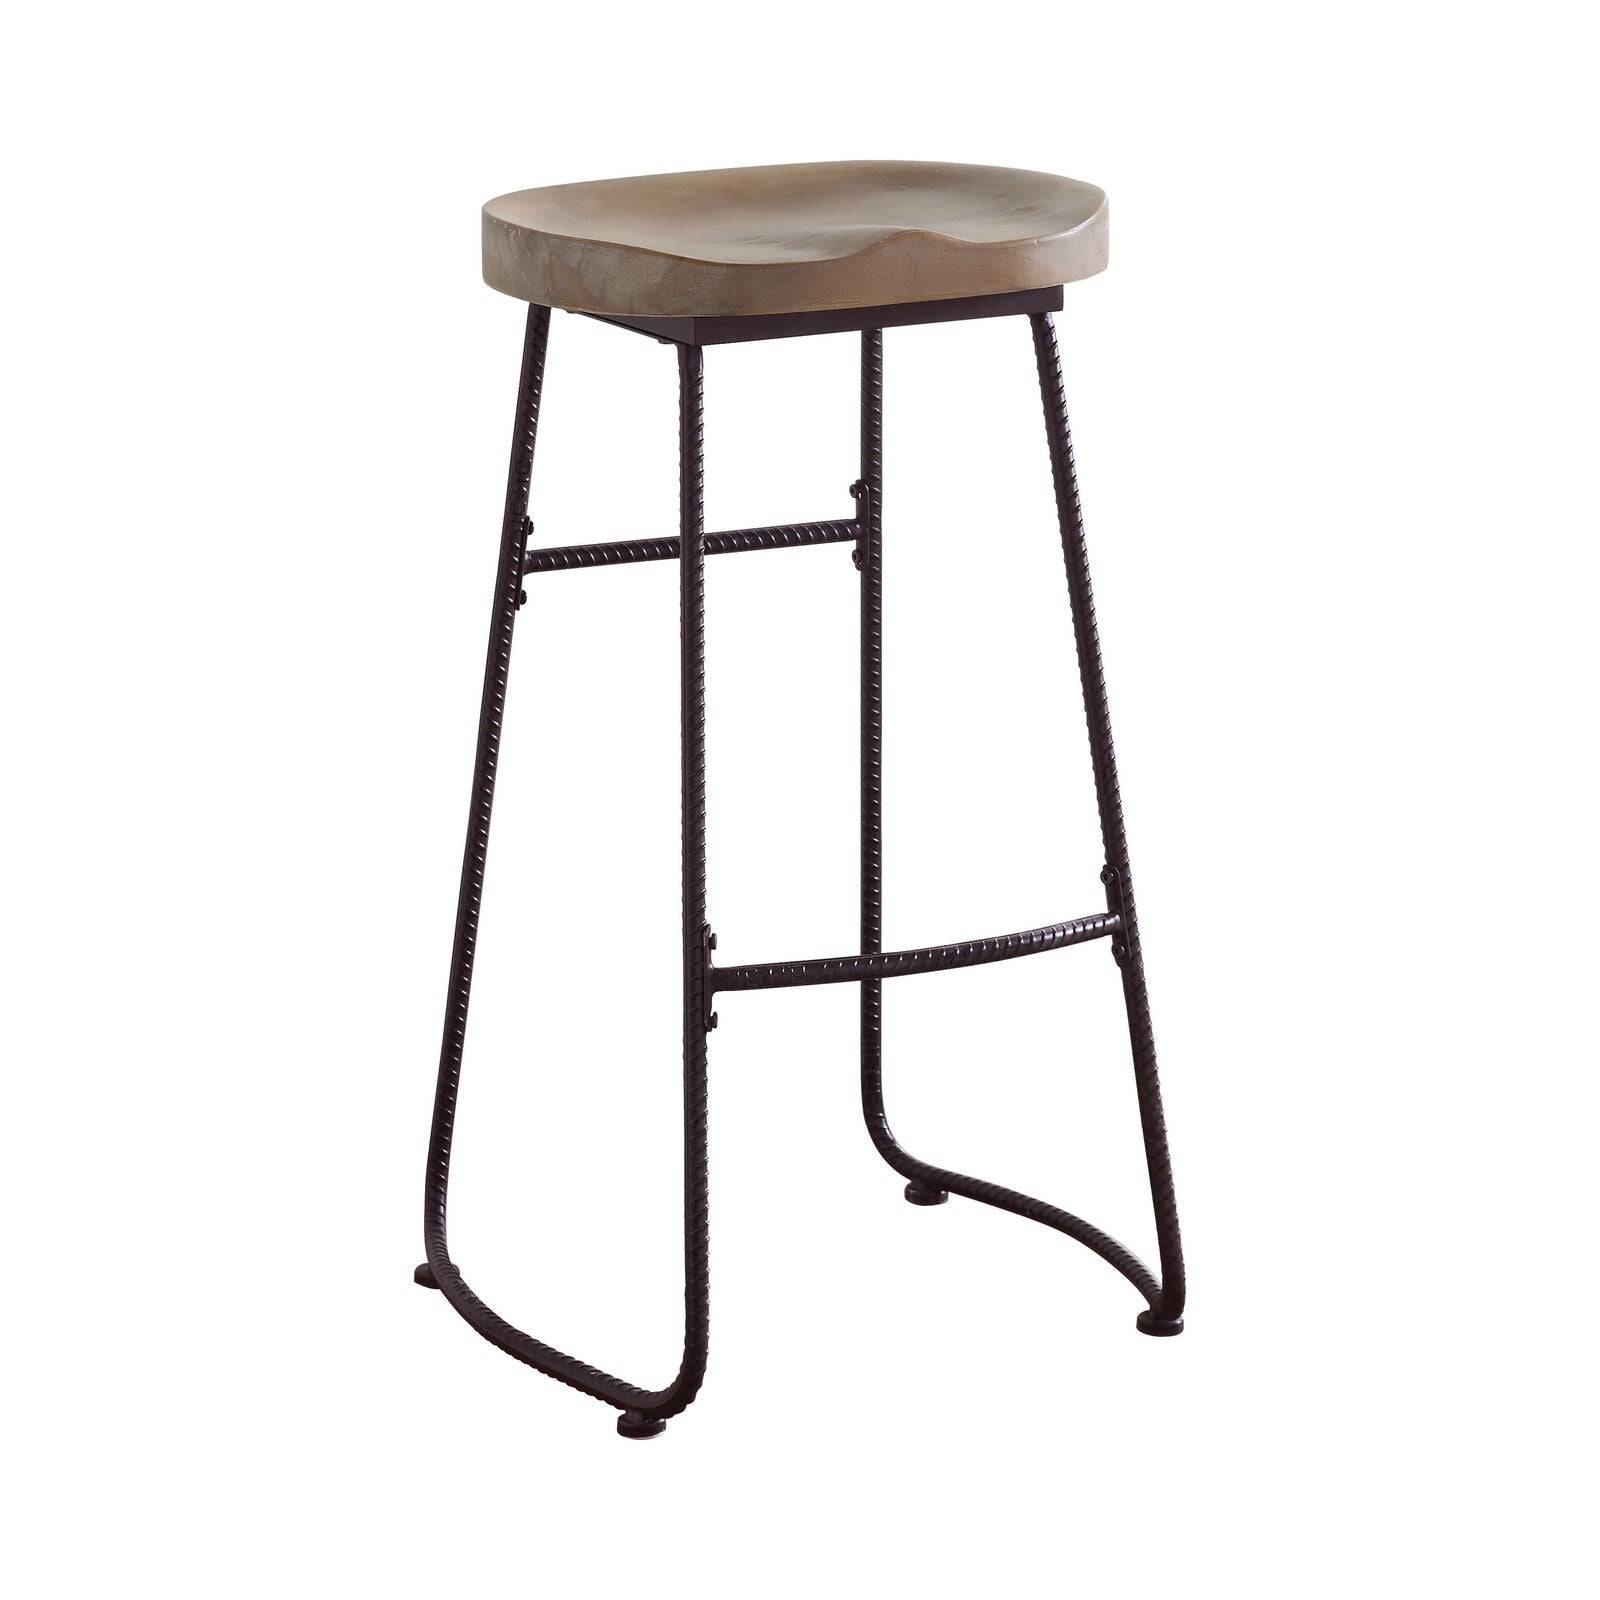 Rustic Backless Bar Height Game Room Stool Driftwood And Dark Bronze Metal